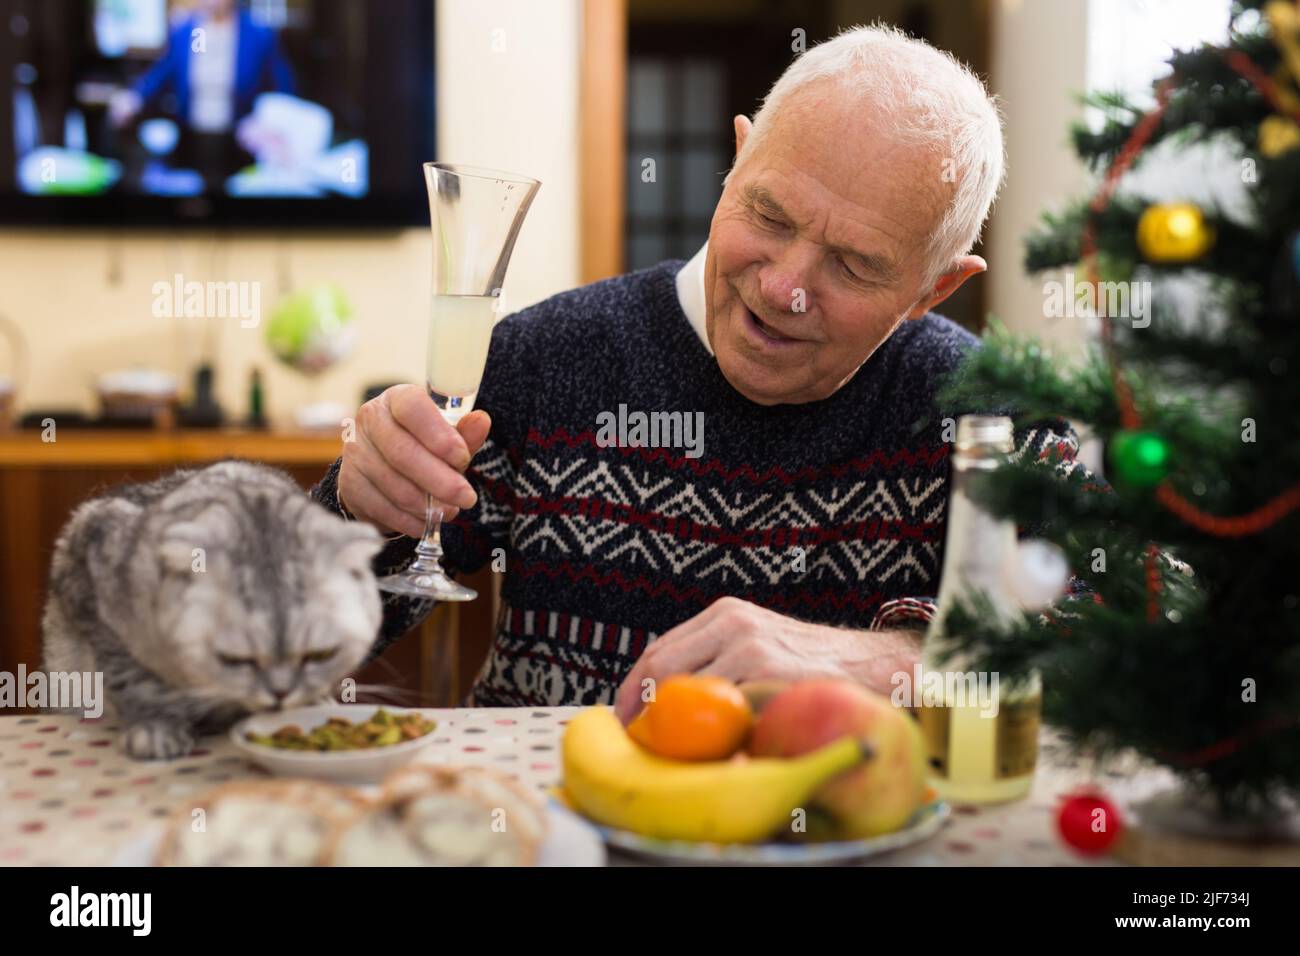 Retired man, together with Scottish cat, celebrates Christmas at festive table Stock Photo